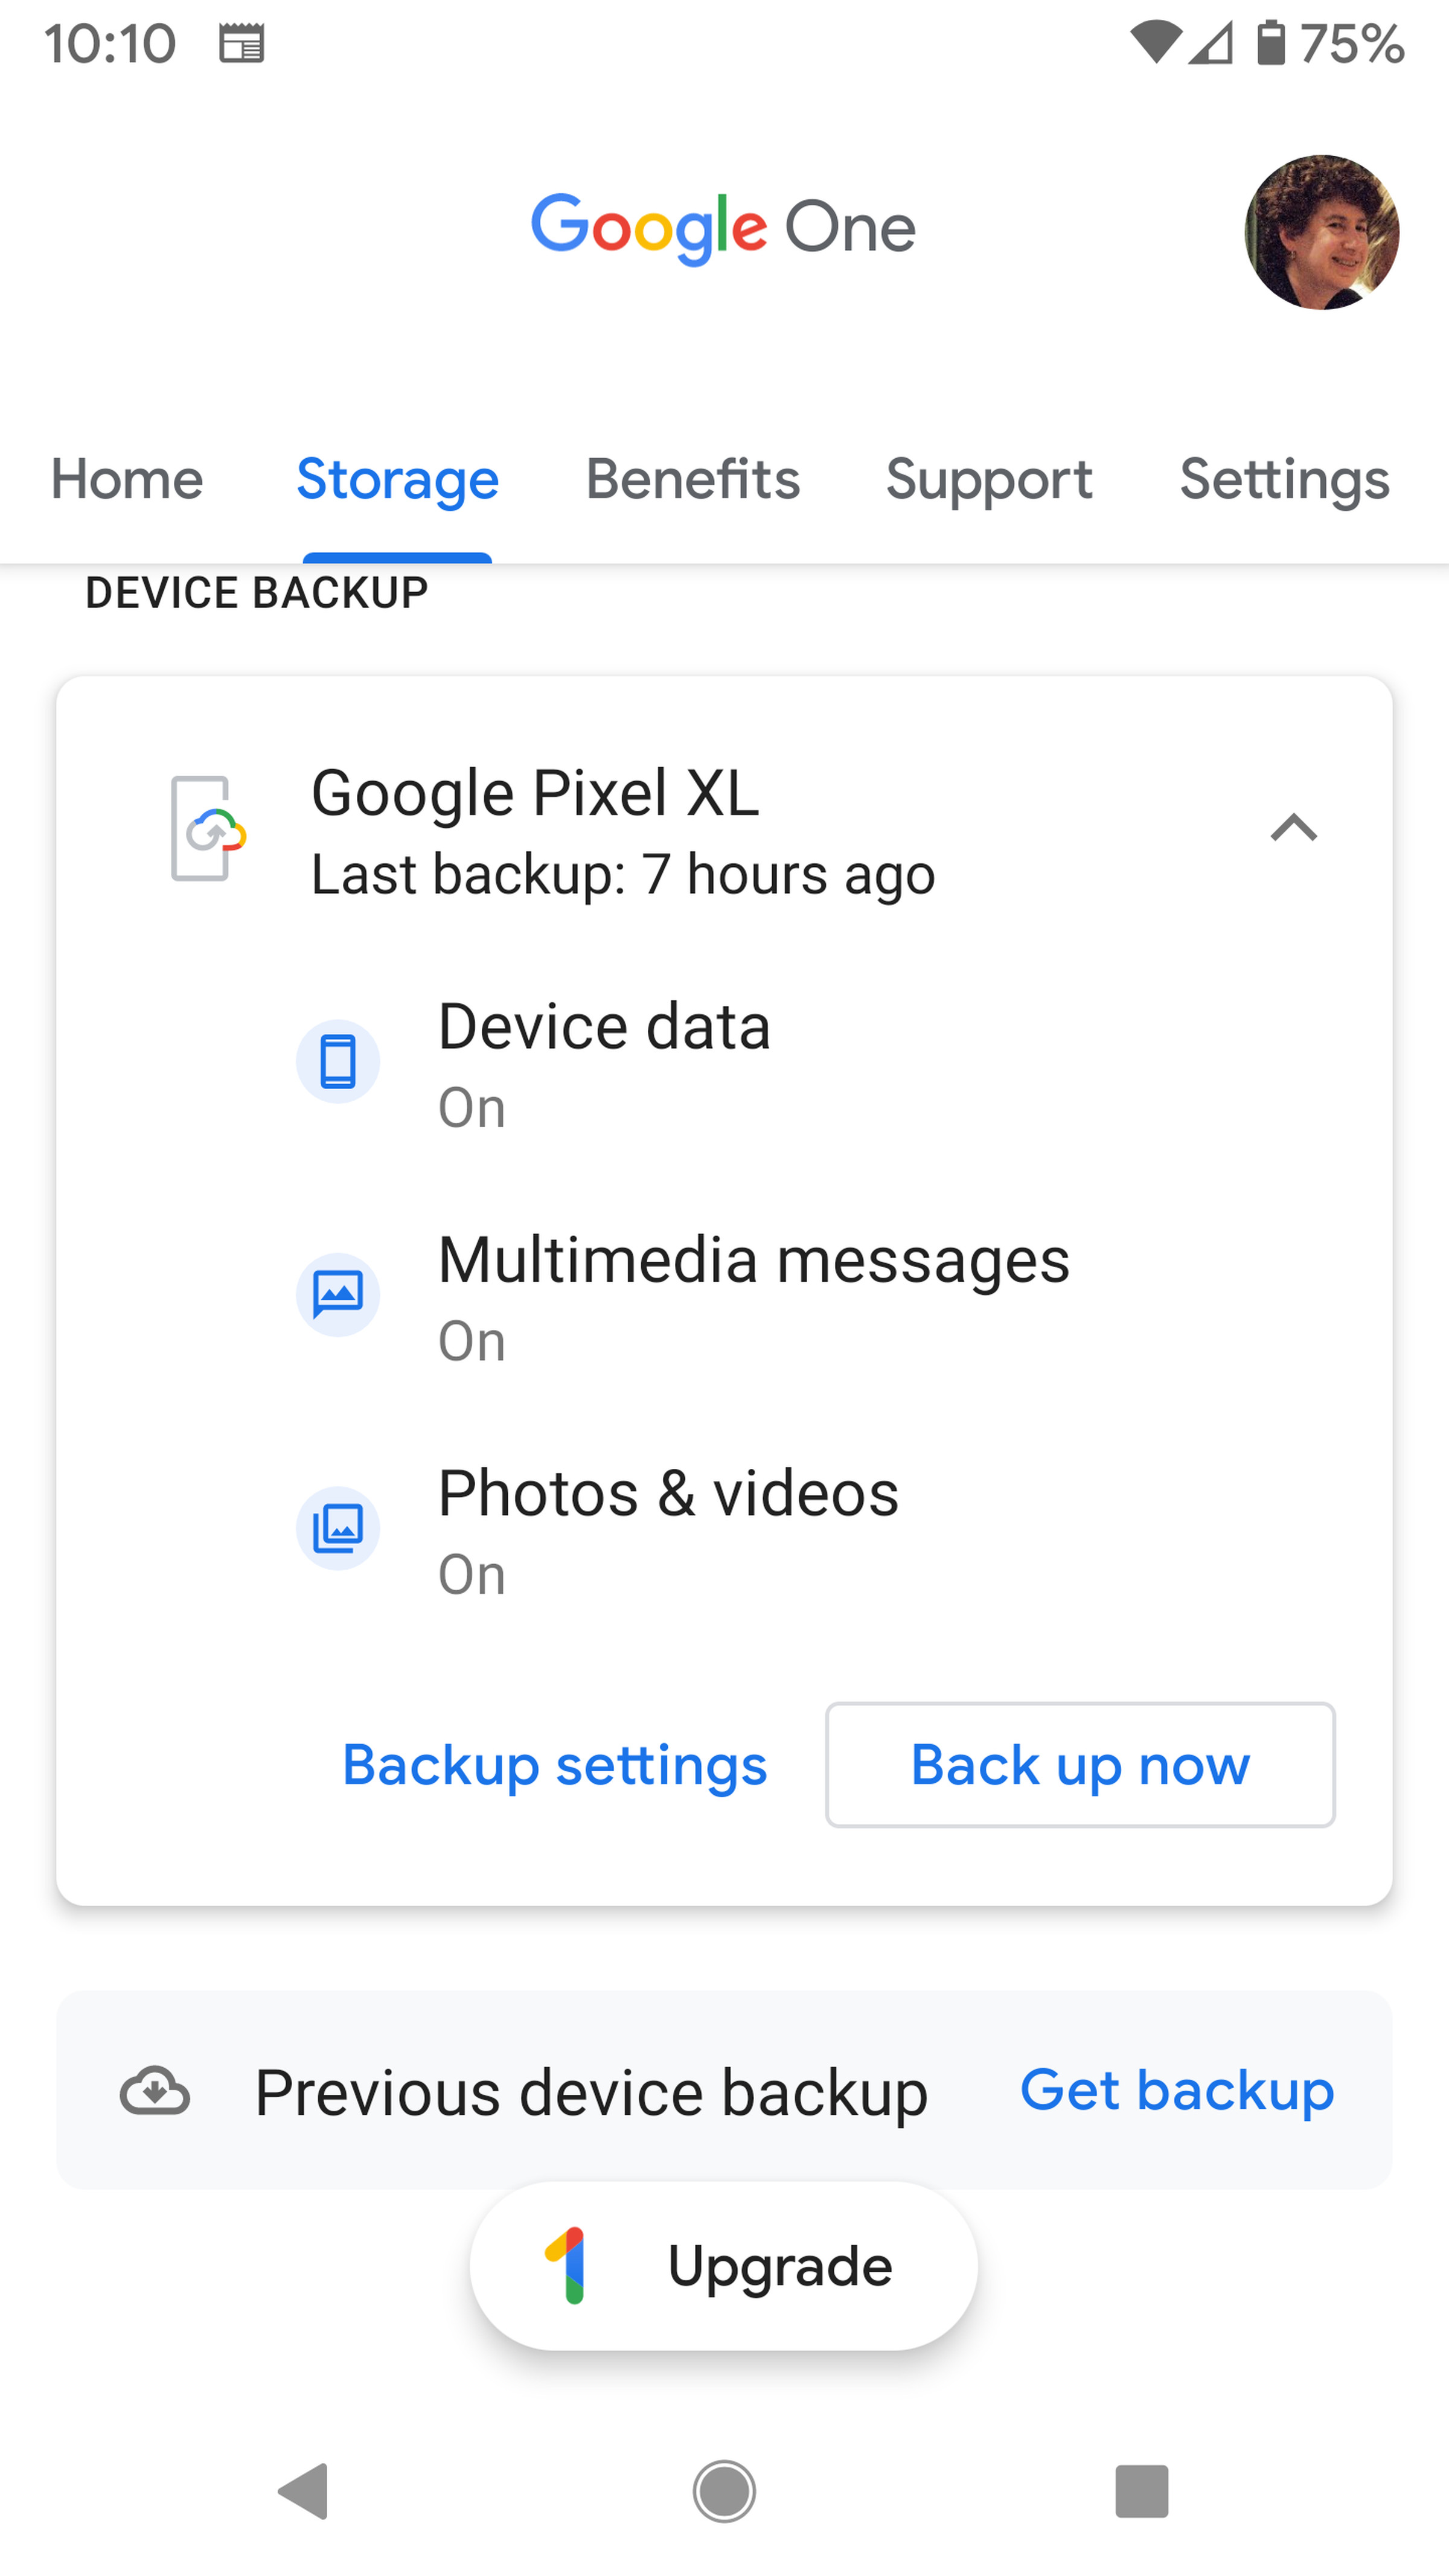 Select the “Storage” tab and tap on “Back up now”